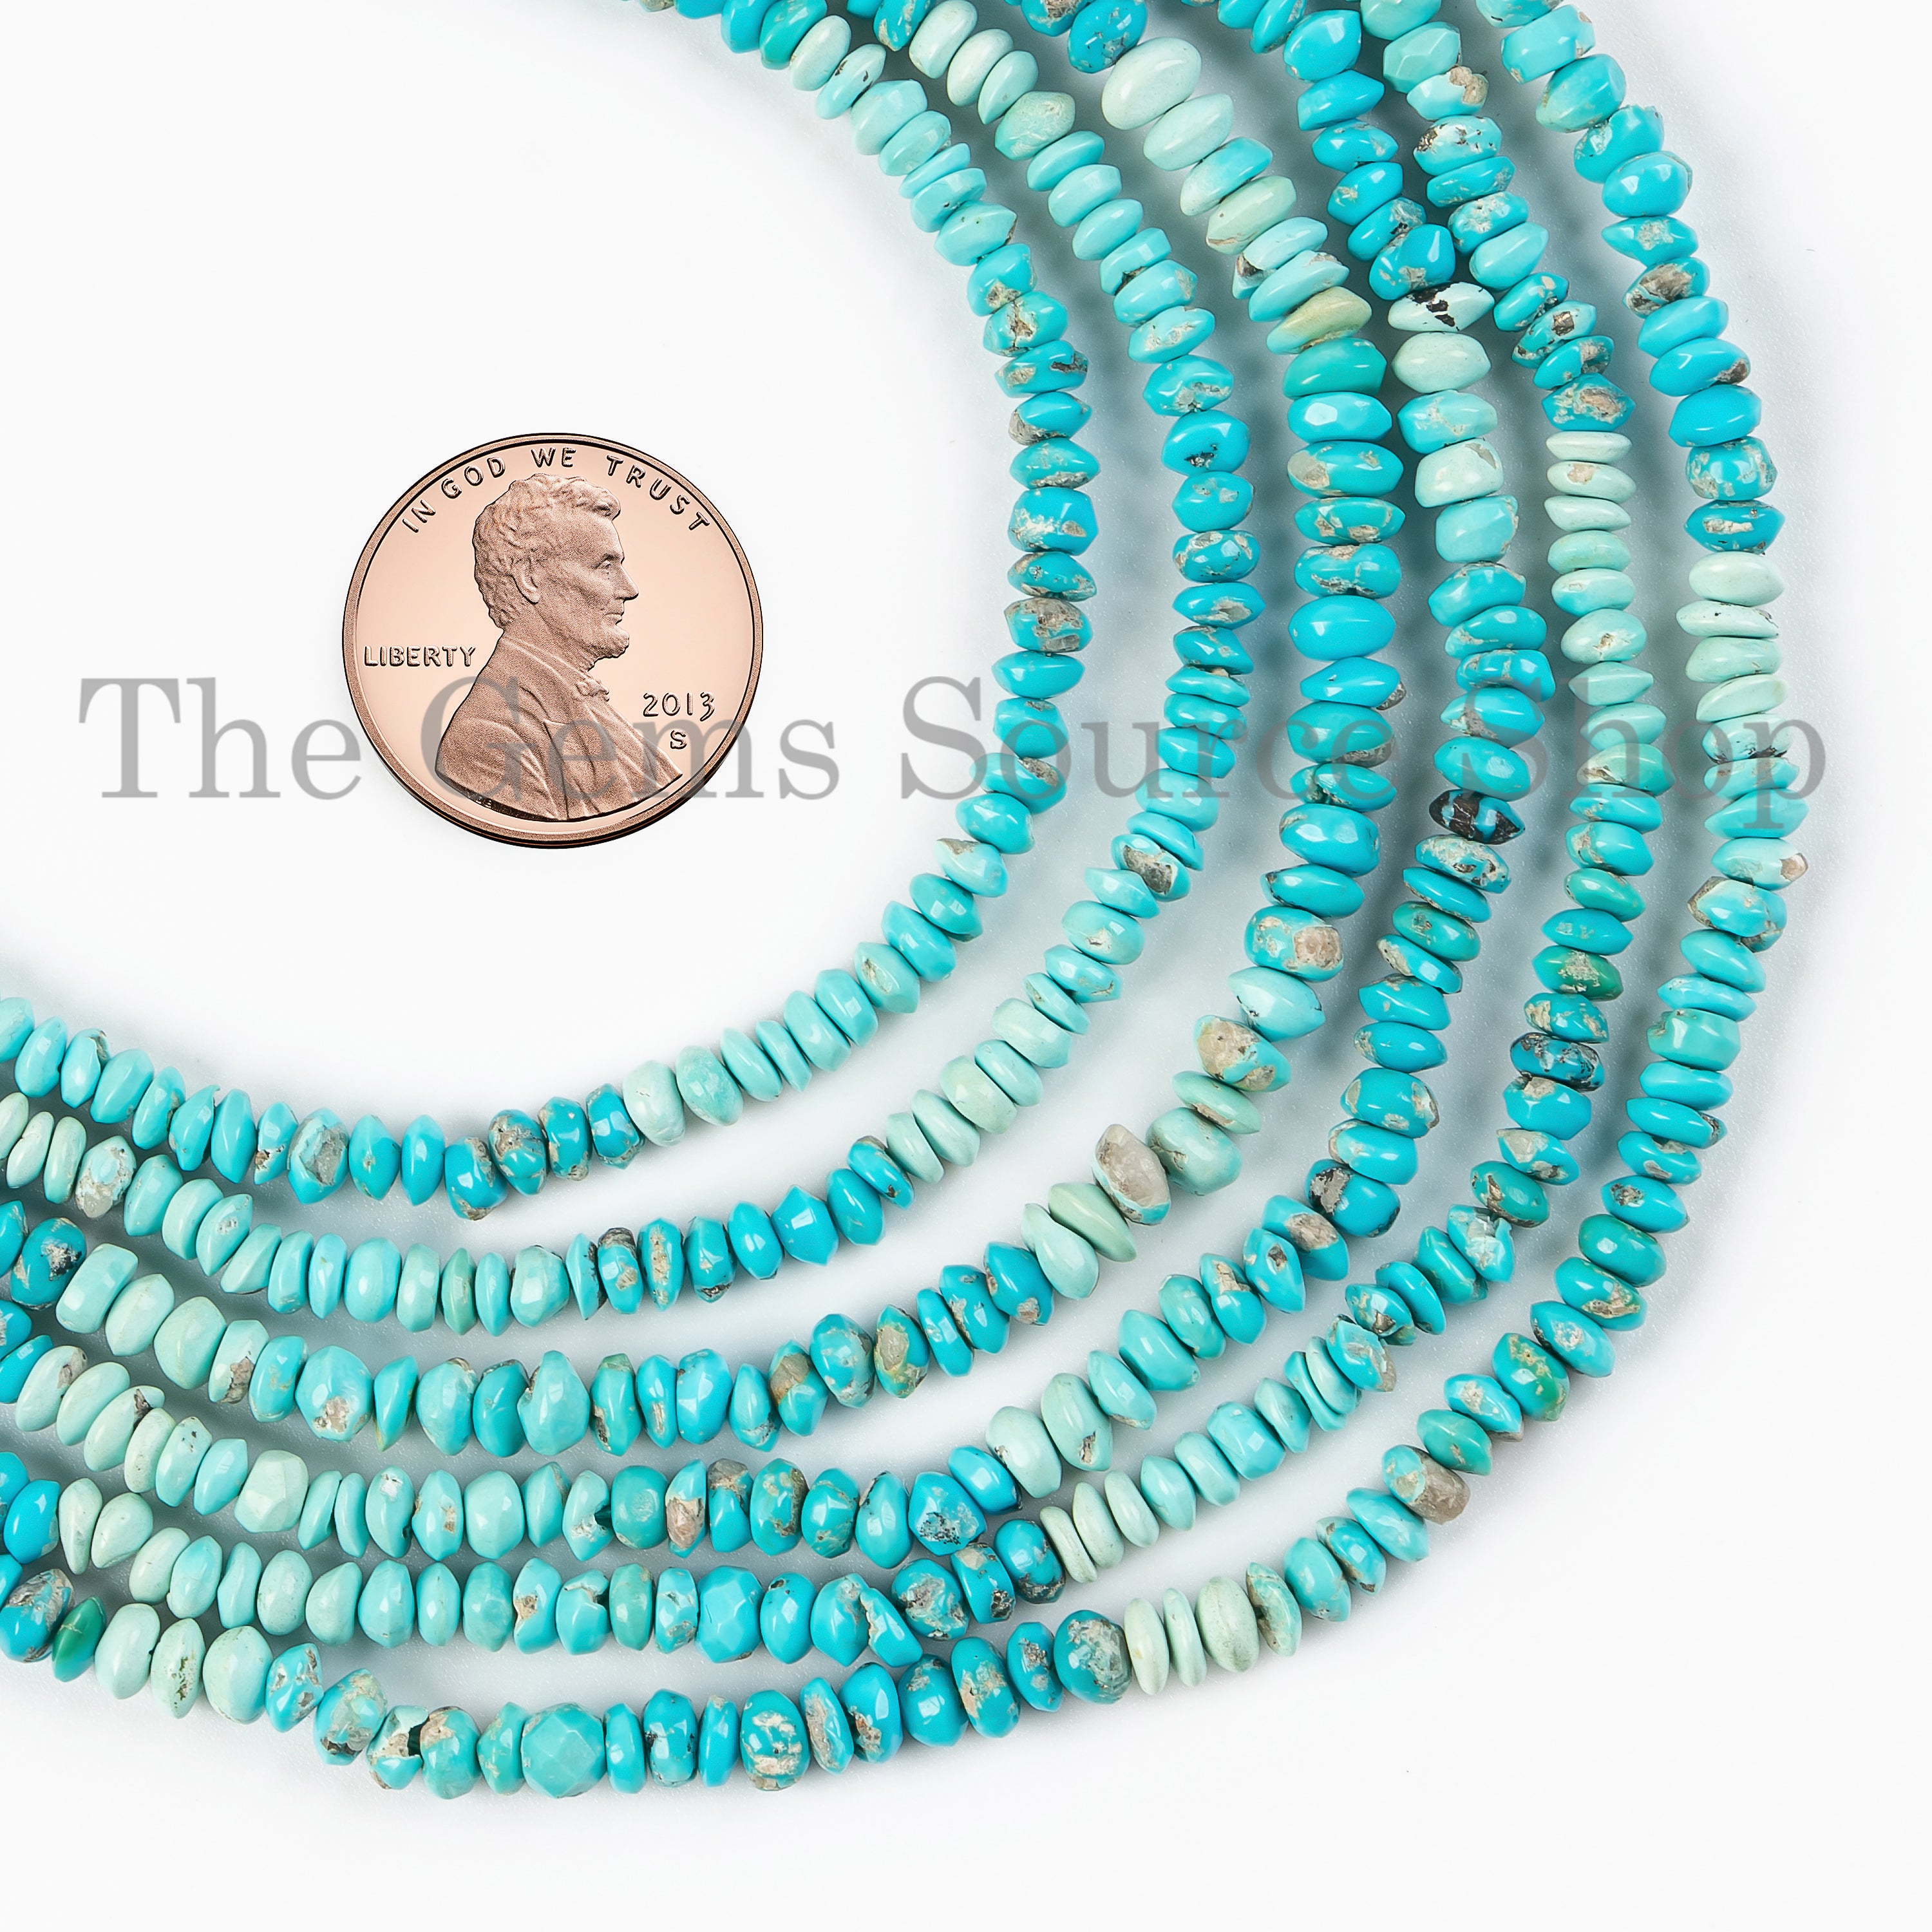 Shaded Turquoise Beads, Turquoise Smooth Beads, Turquoise Button Shape Beads, Wholesale Beads